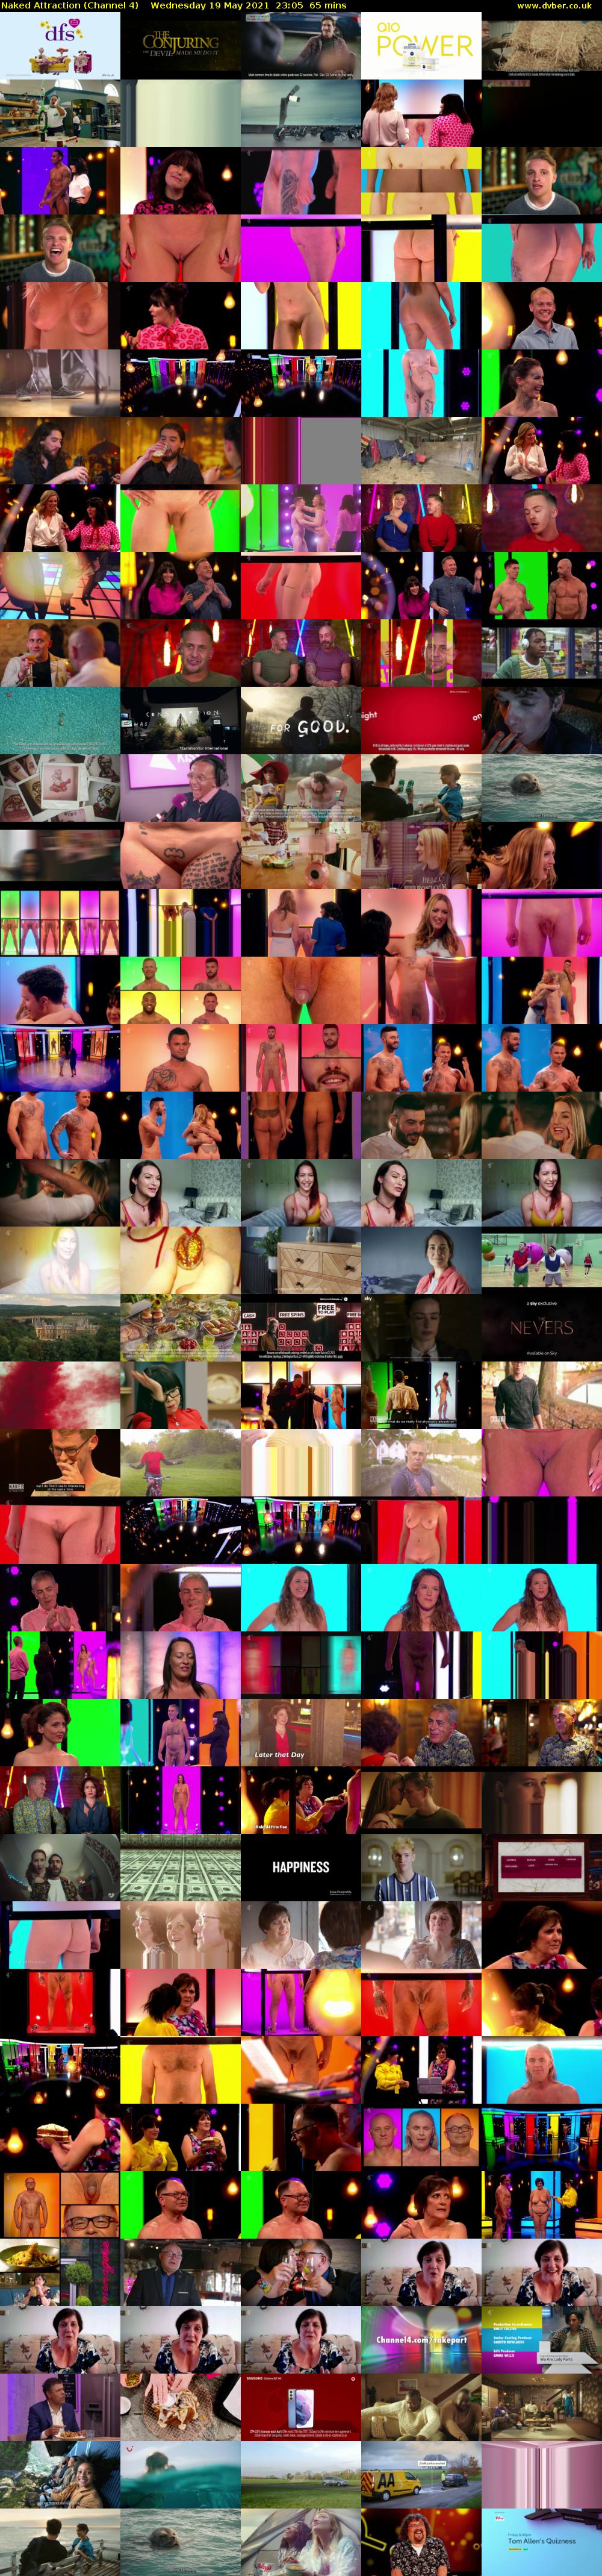 Naked Attraction (Channel 4) Wednesday 19 May 2021 23:05 - 00:10